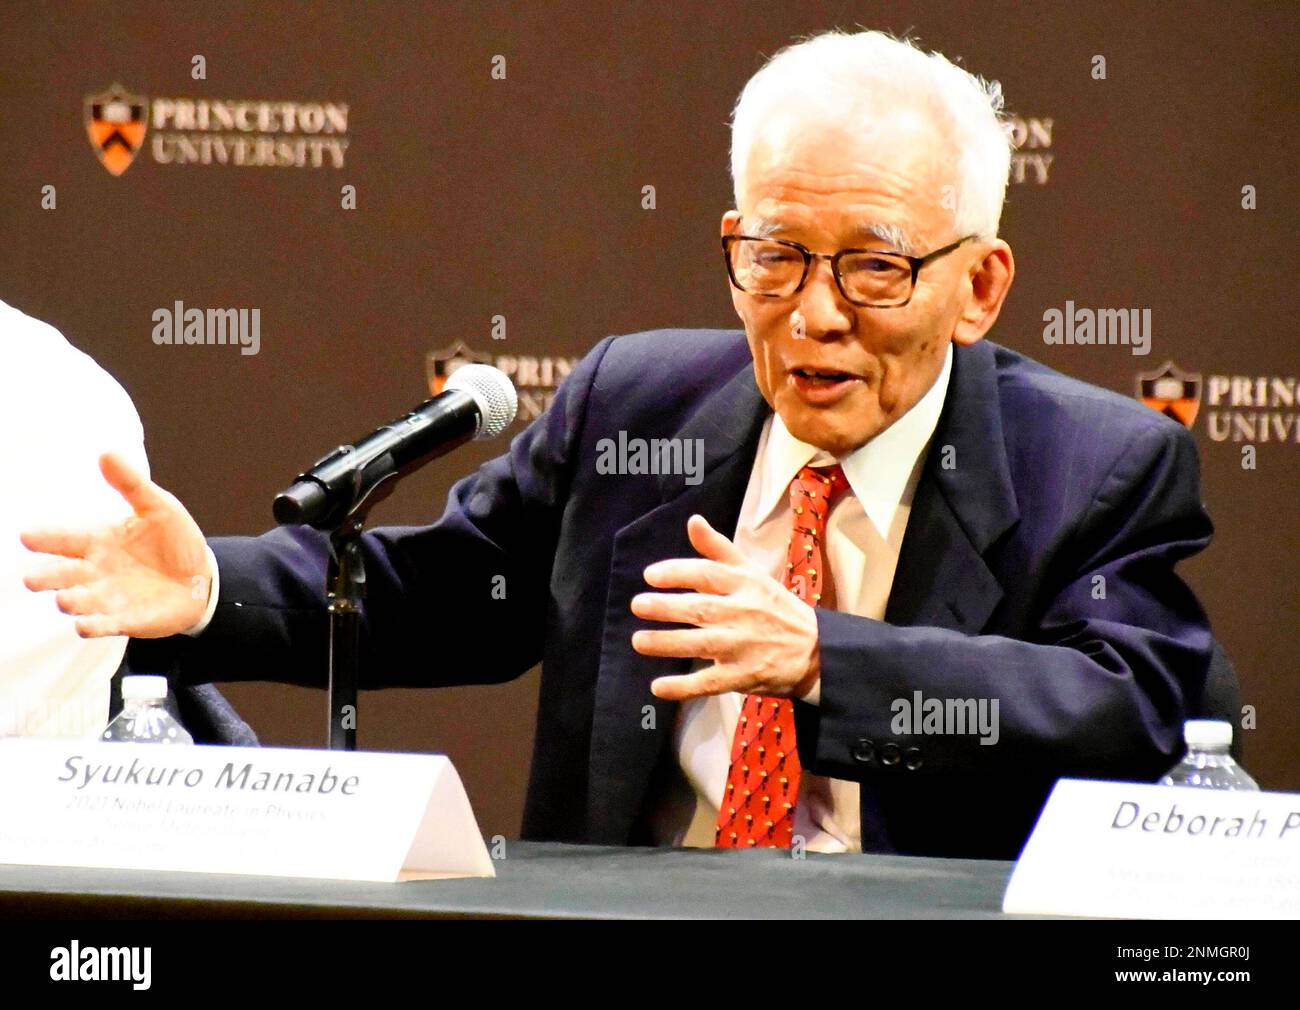 Syukuro Manabe, Princenton University Meteorologist Professor speaks at a  news conference after winning a share of the 2021 Nobel Prize in physics at  the university in New Jersey, the U.S. on Oct.